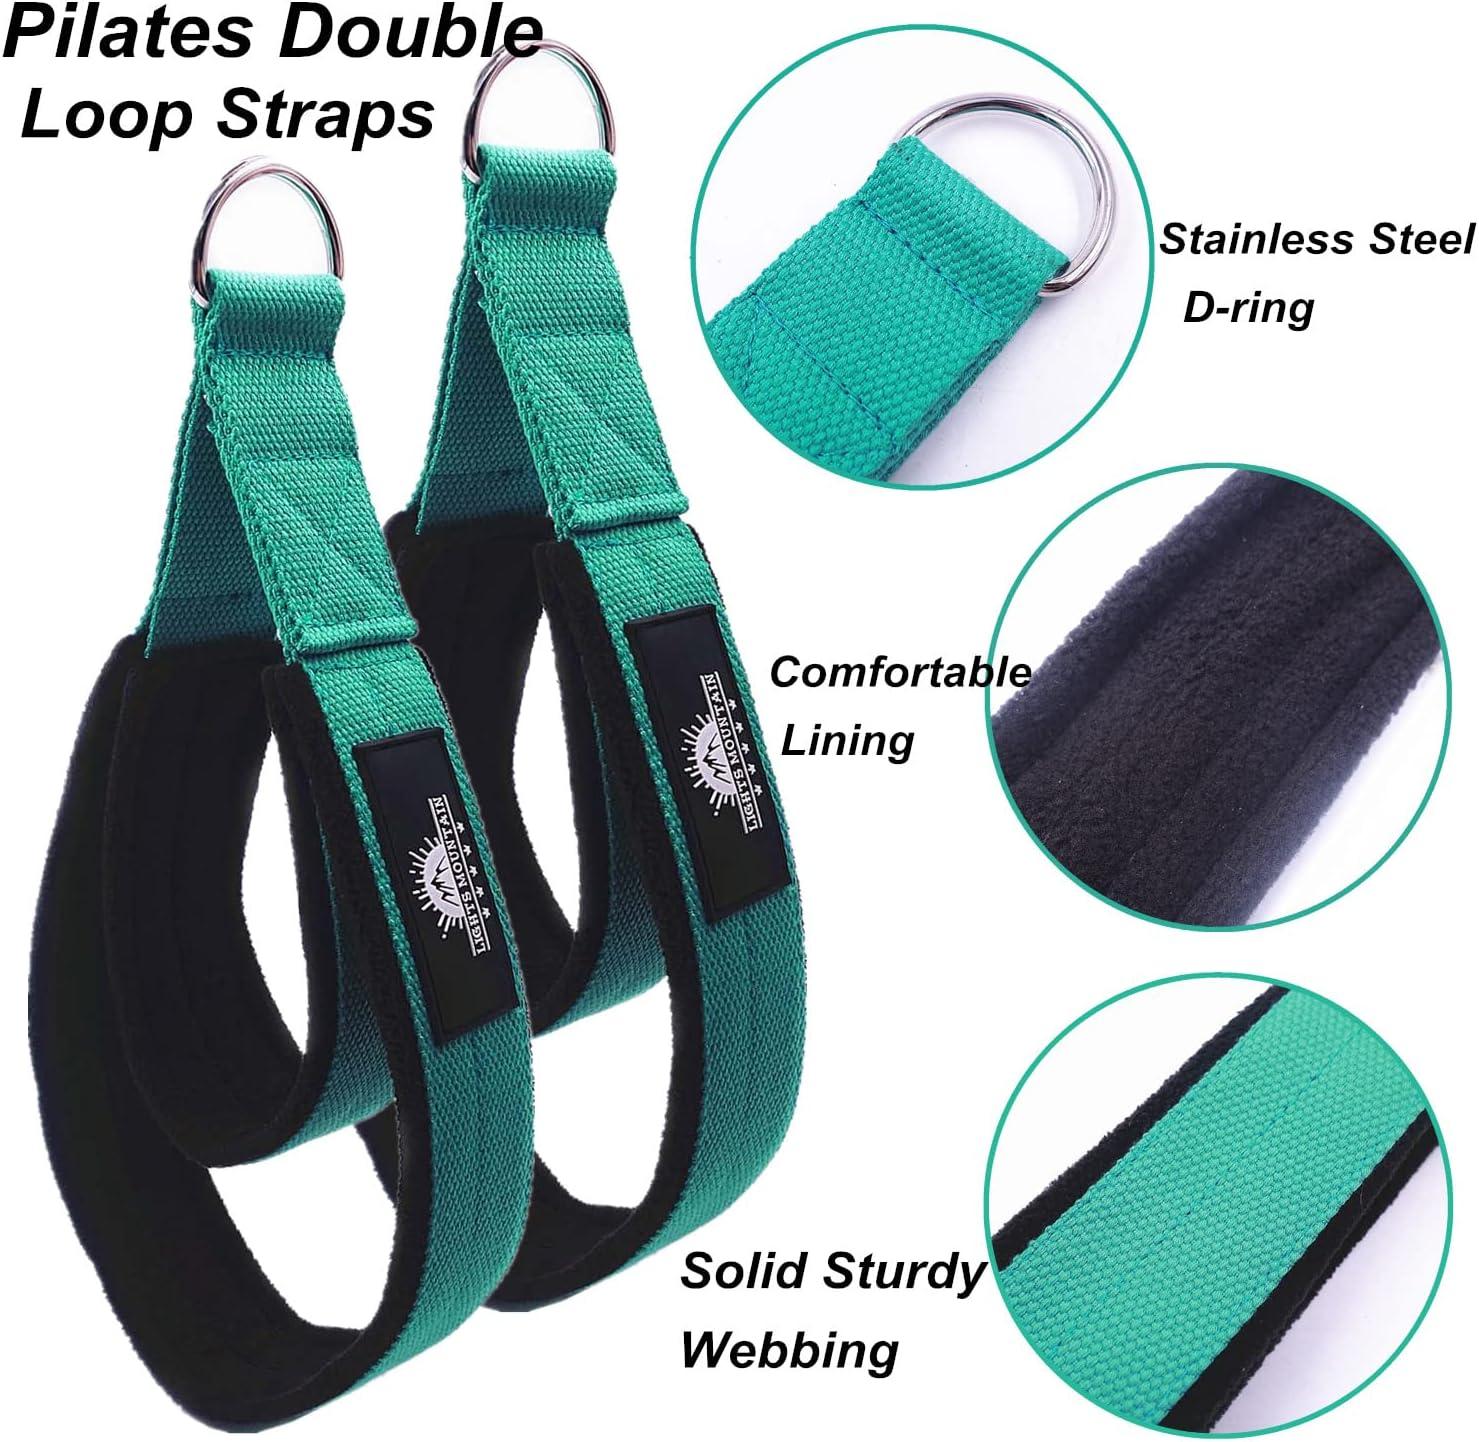 Lights Mountain 1 Pair Pilates Double Loop Straps for Reformer